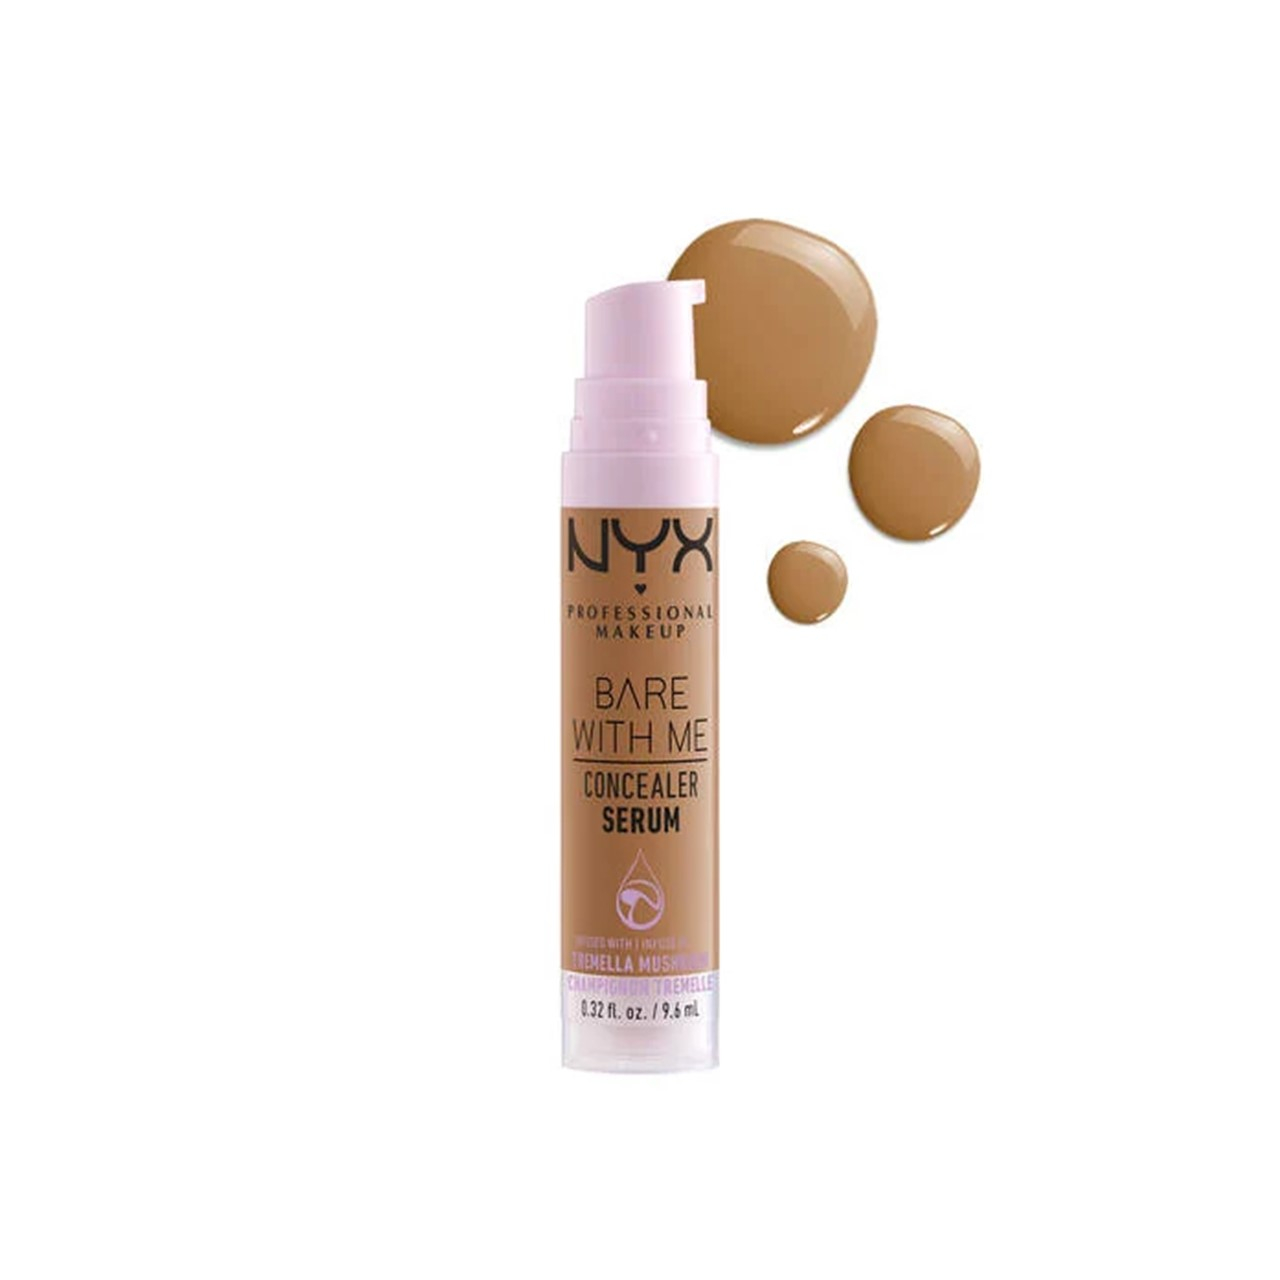 Nyx Pro Makeup Bare With Me